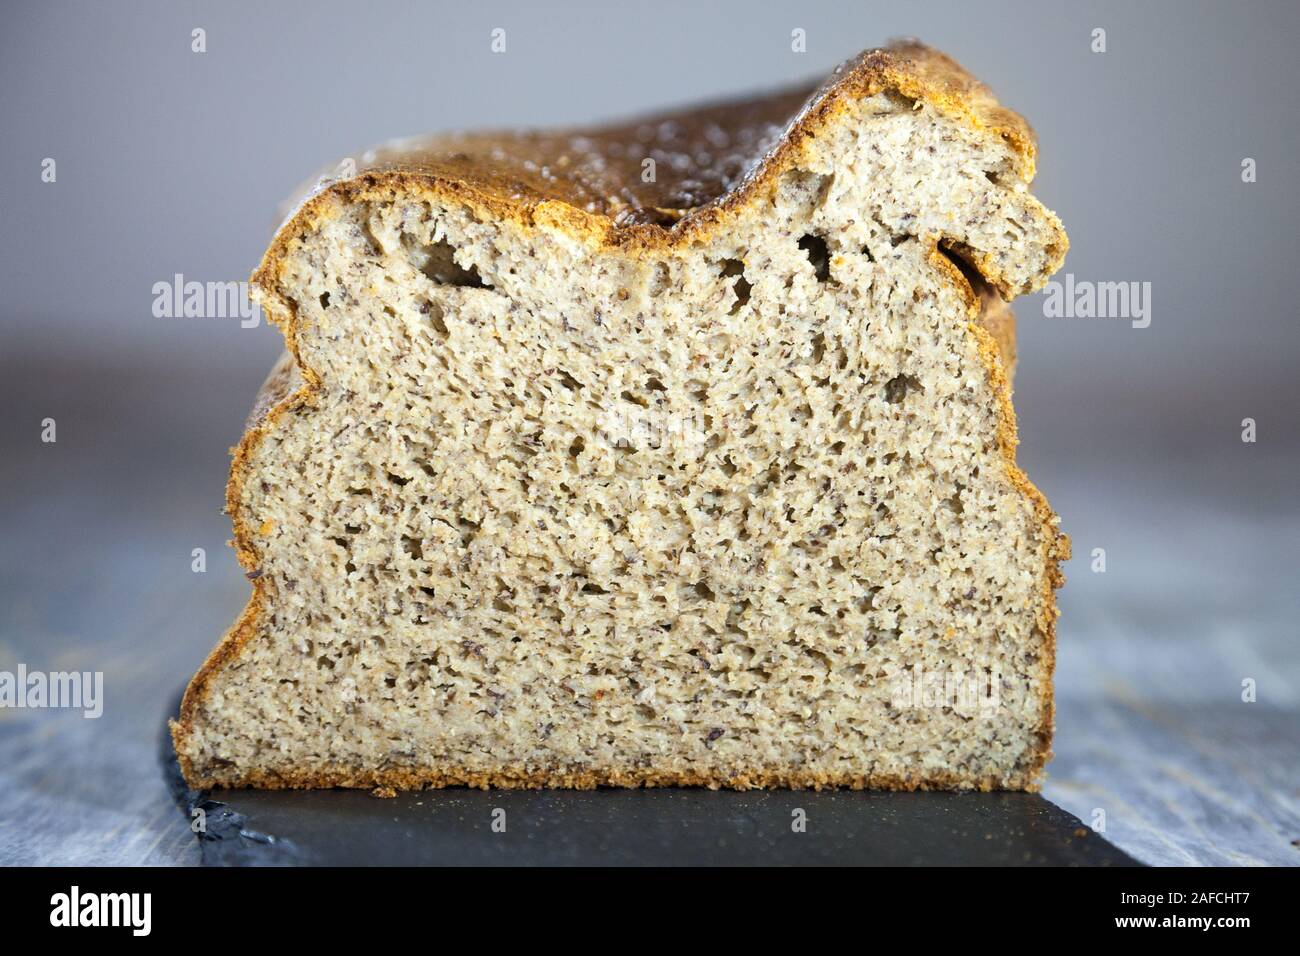 Loaf of a French gluten free load of bread, cut and sliced, seen from the profile. It is designed as an alternative for people with health issue, espe Stock Photo